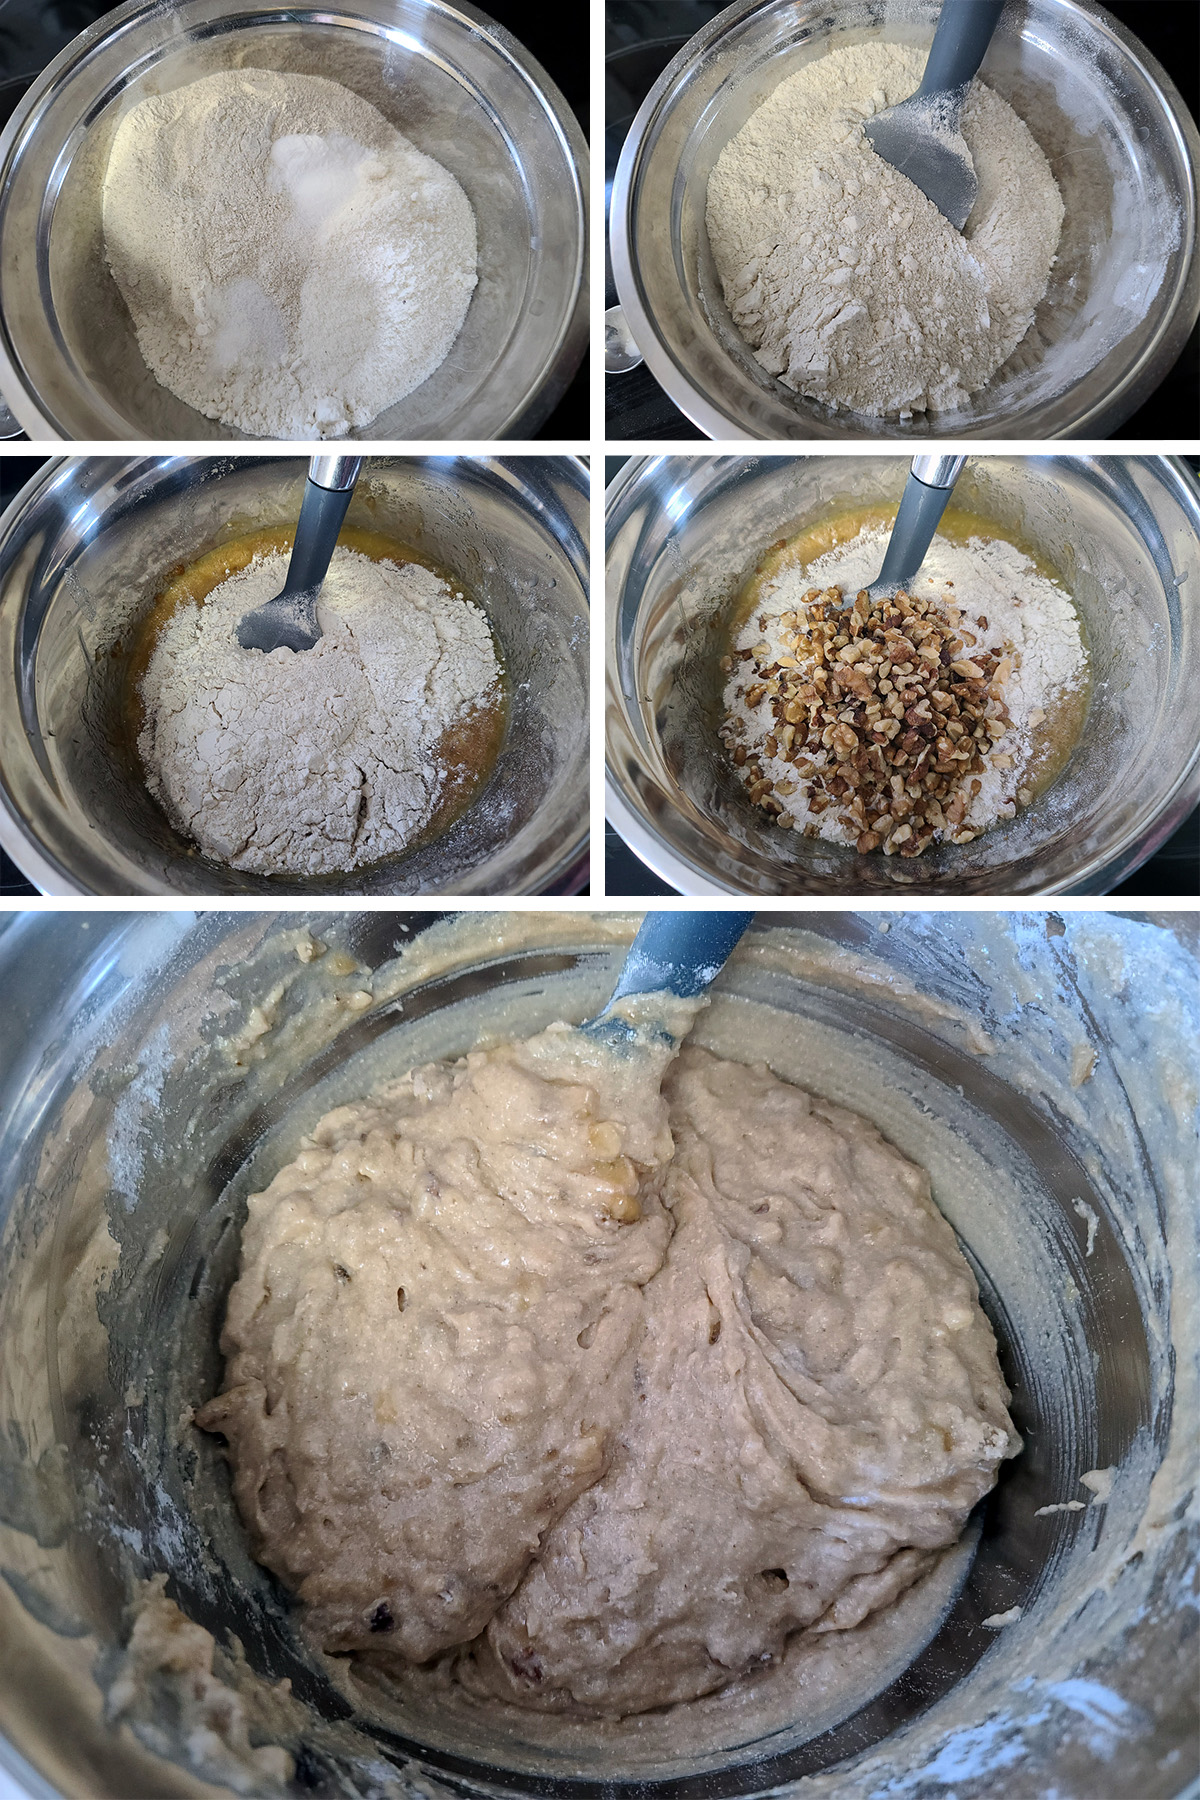 A 5 part image showing the dry ingredients being mixed and combined with the wet ingredients.